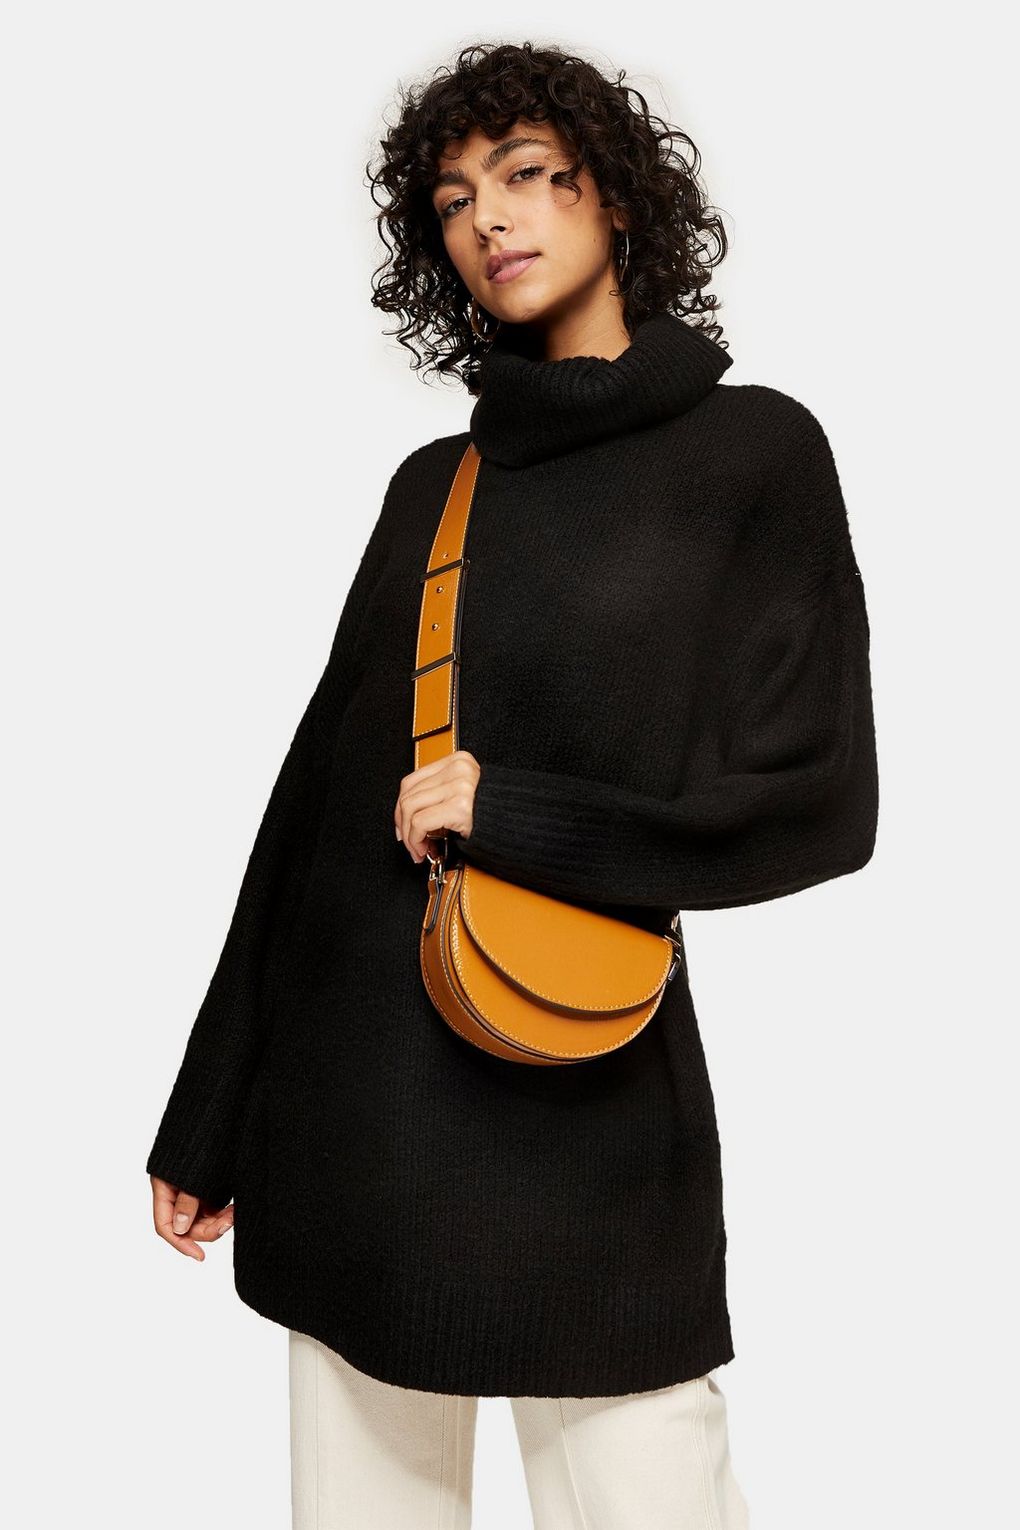 Topshop + Oversized Roll Neck Knitted Sweater Dress